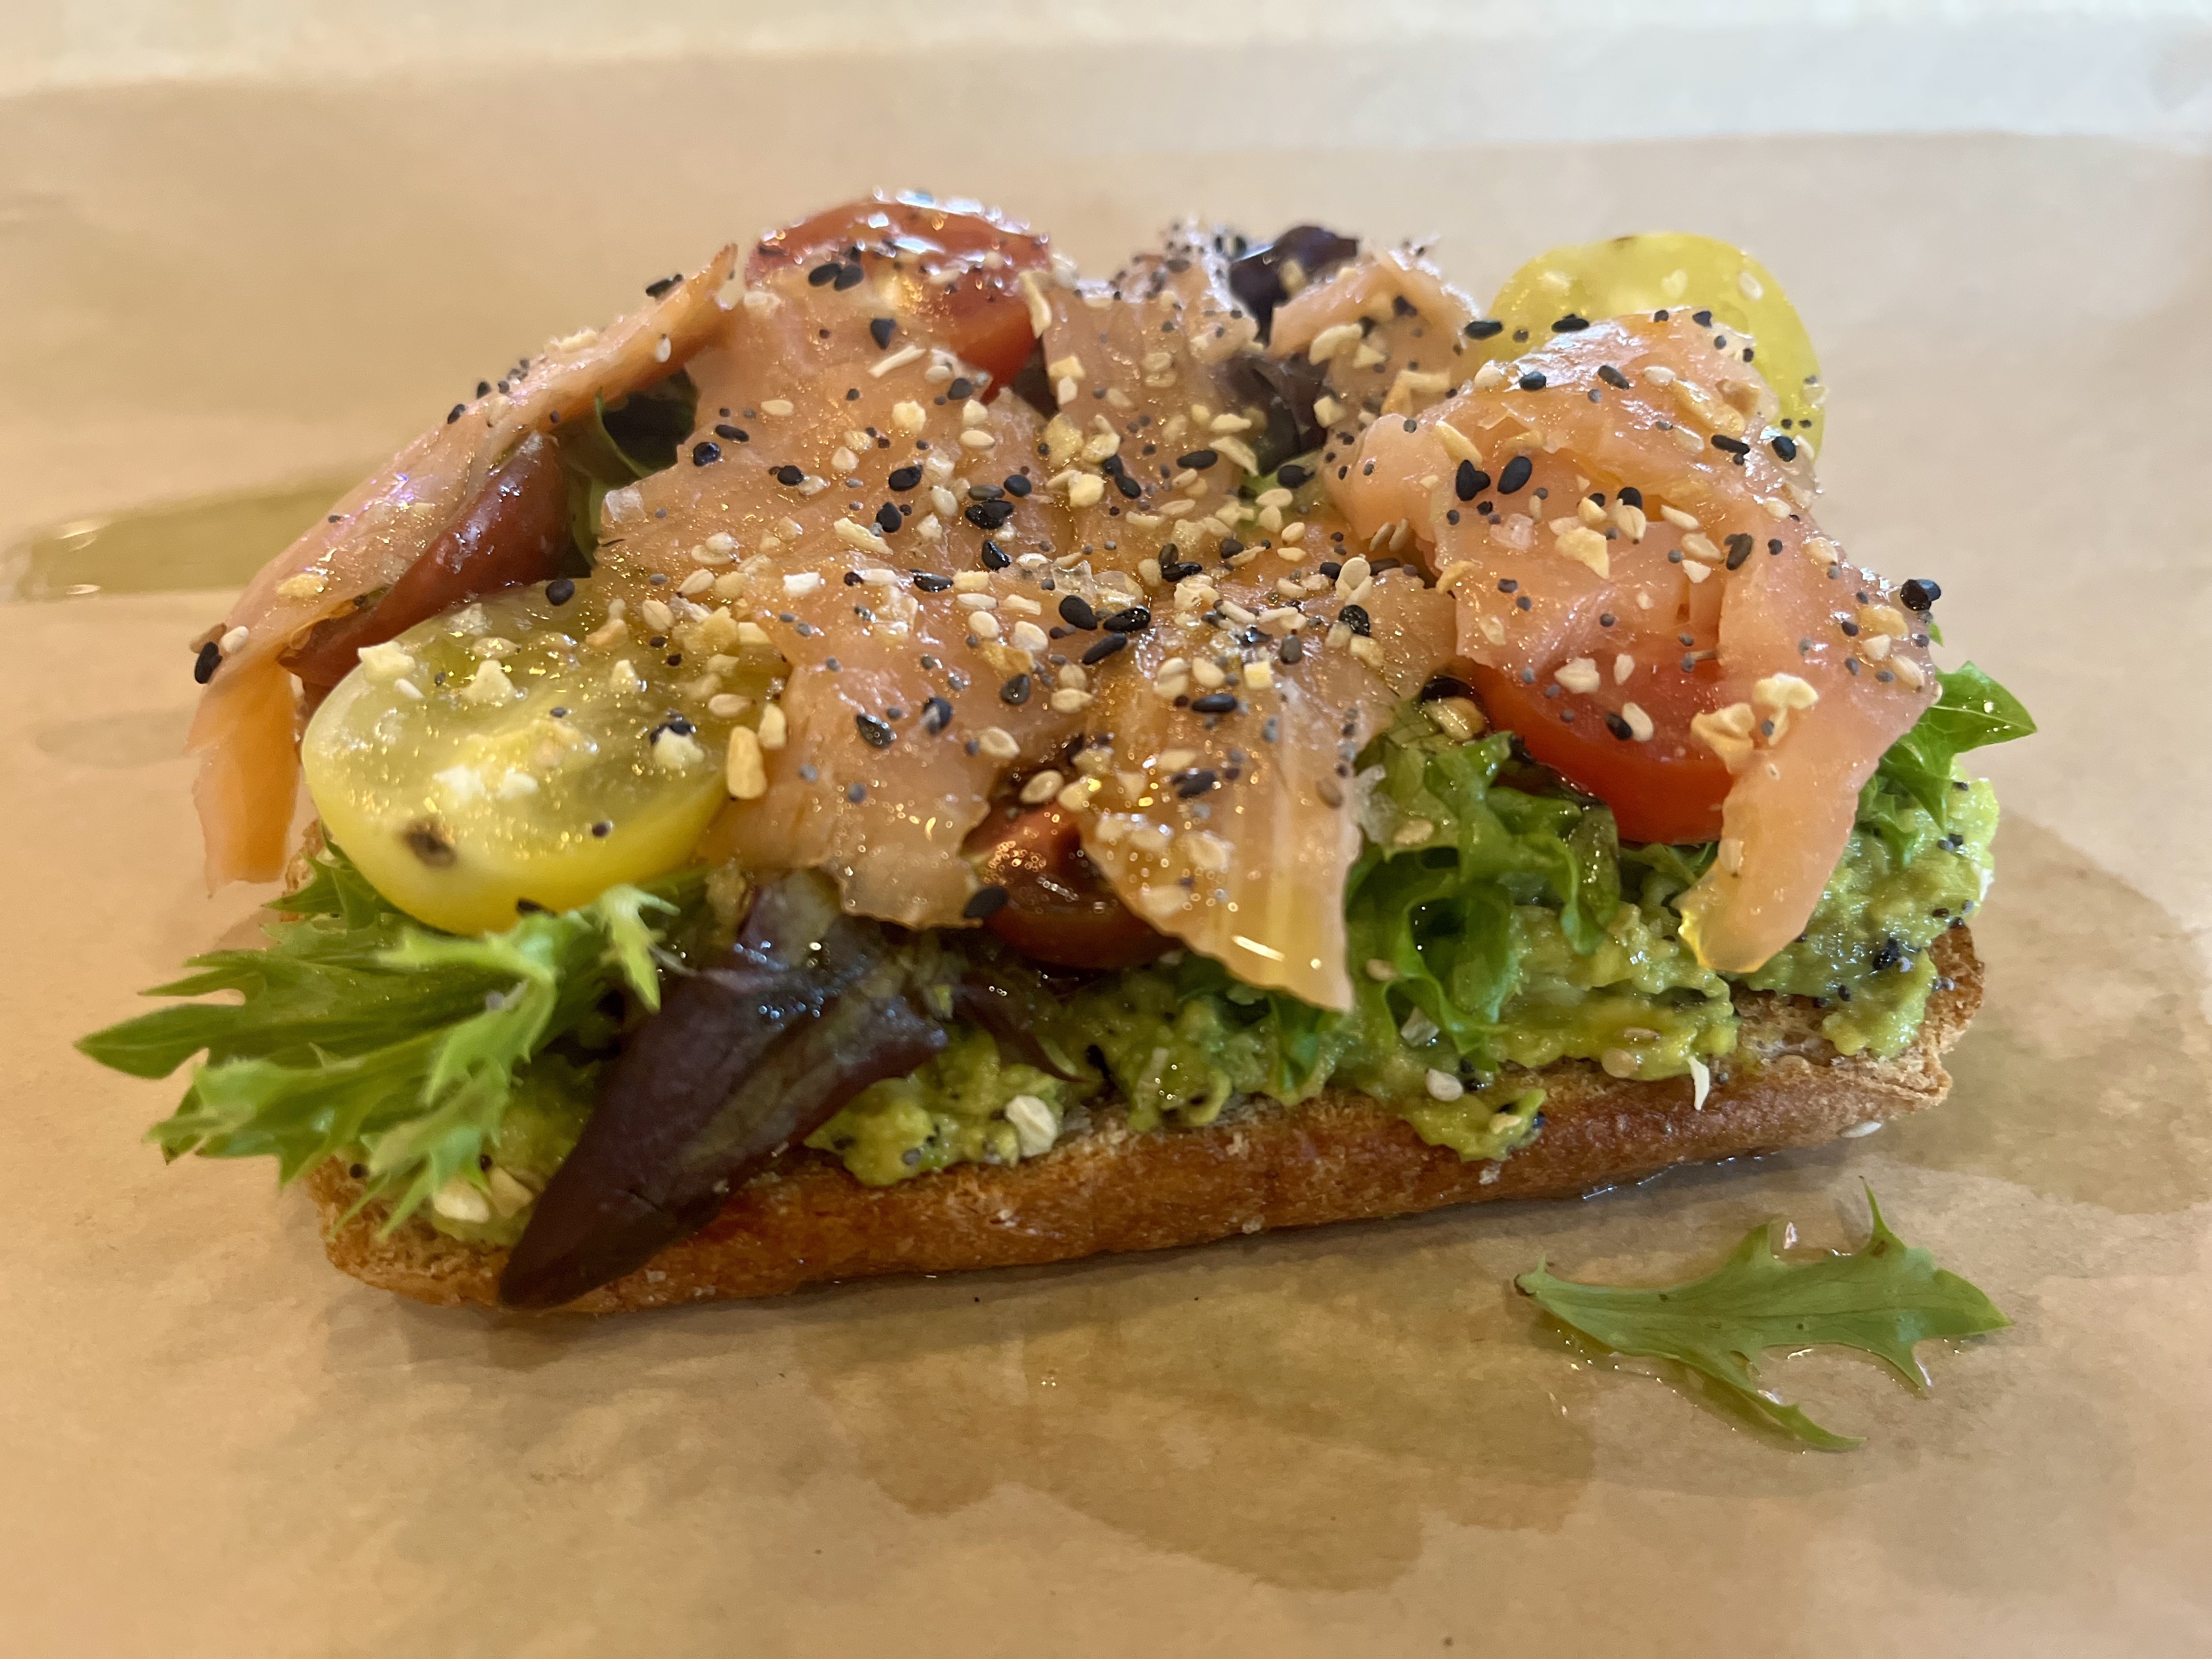 A slice of avocado toast from Lindsay's Kitchen at 14 Mill Market